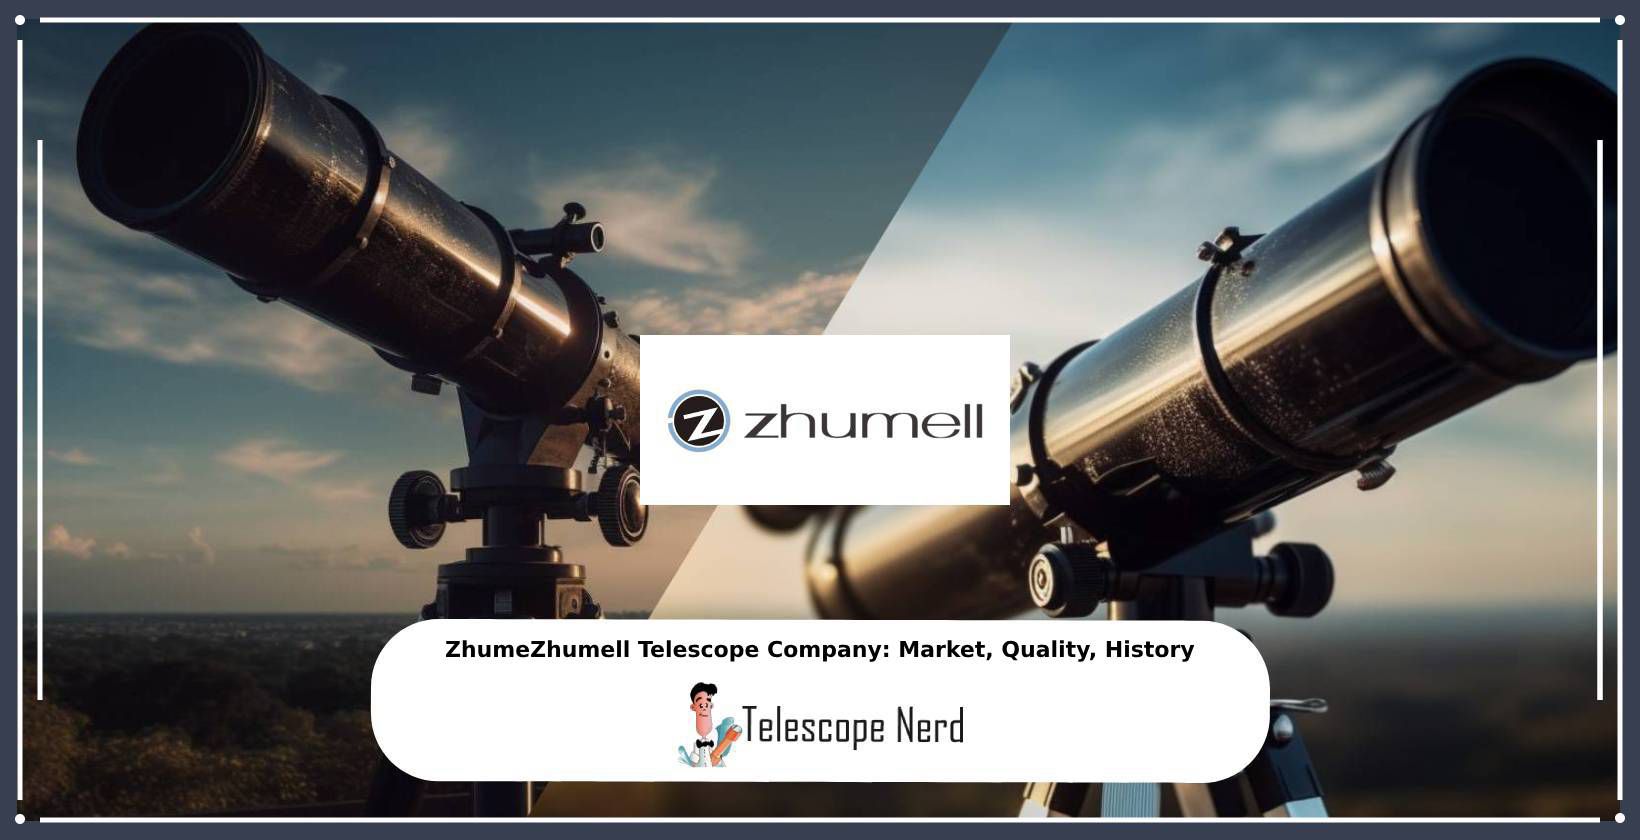 zhumell telescope brand and zhumell telescope quality